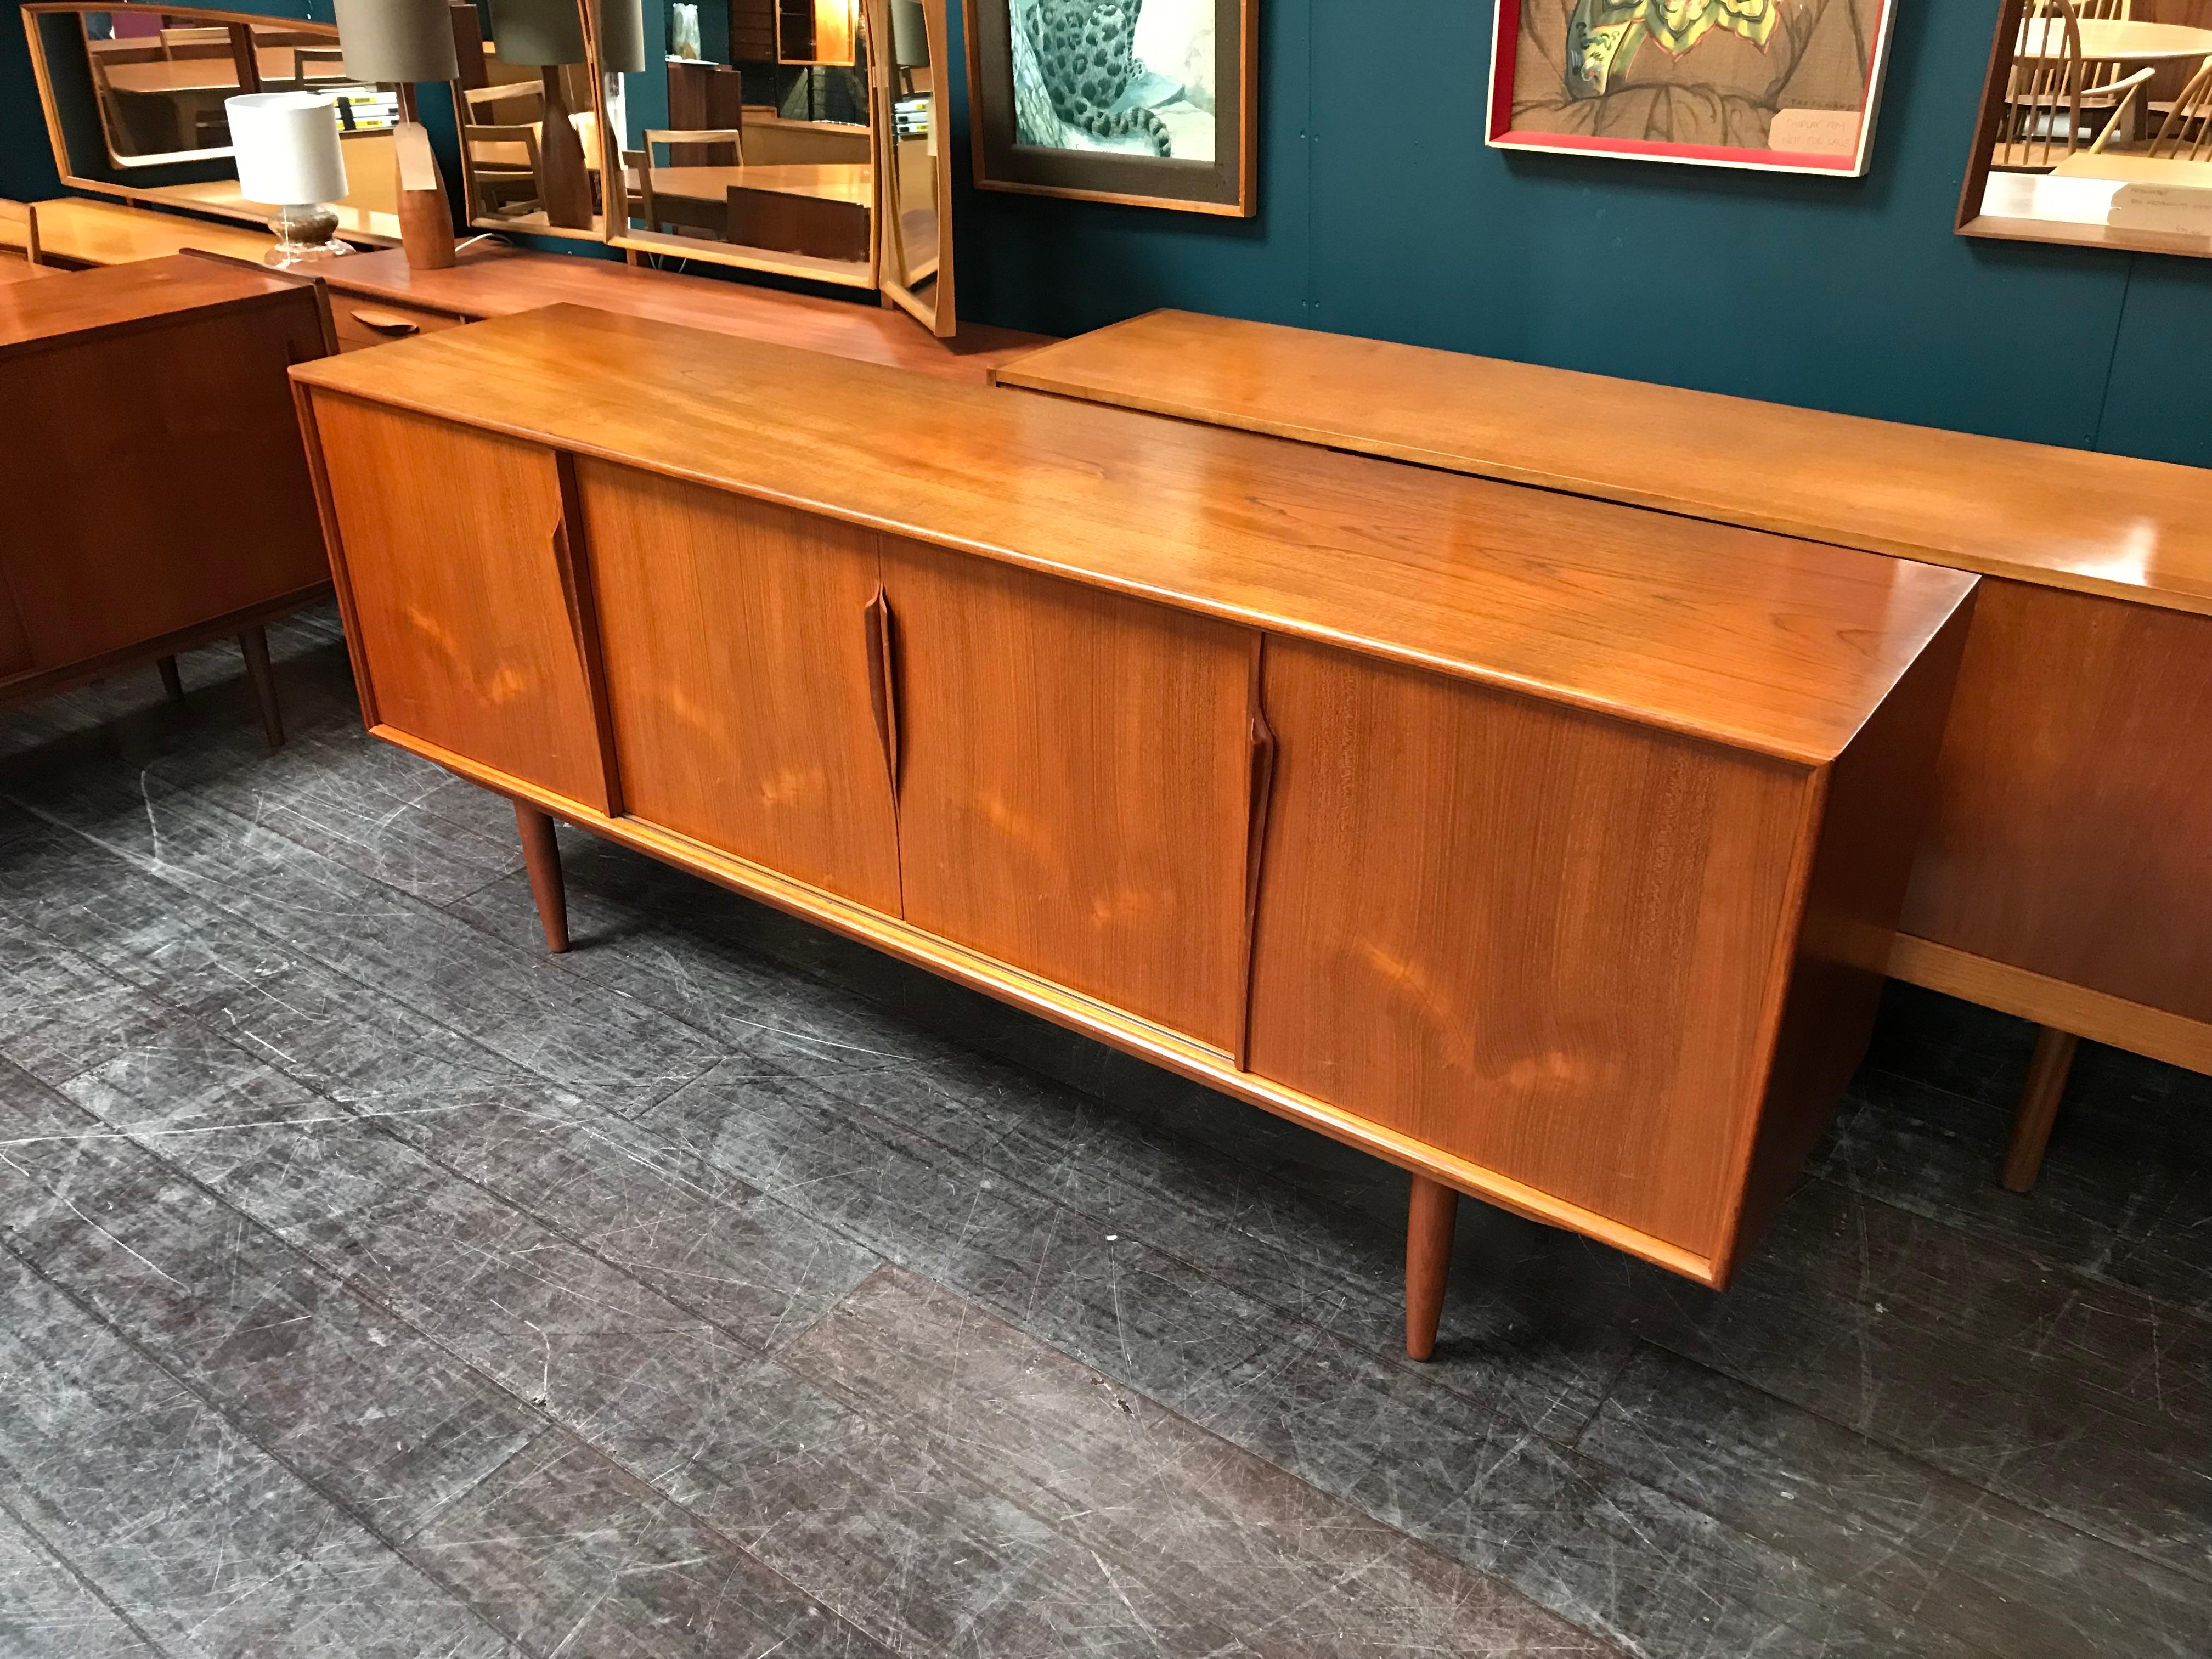 A fascinating teak sideboard produced in Denmark by the furniture maker Omann Jun and featuring sliding doors with three felt-lined drawers hidden behind its sleek exterior. This model by Gunni Omann has those beautiful long ‘organic’ handles